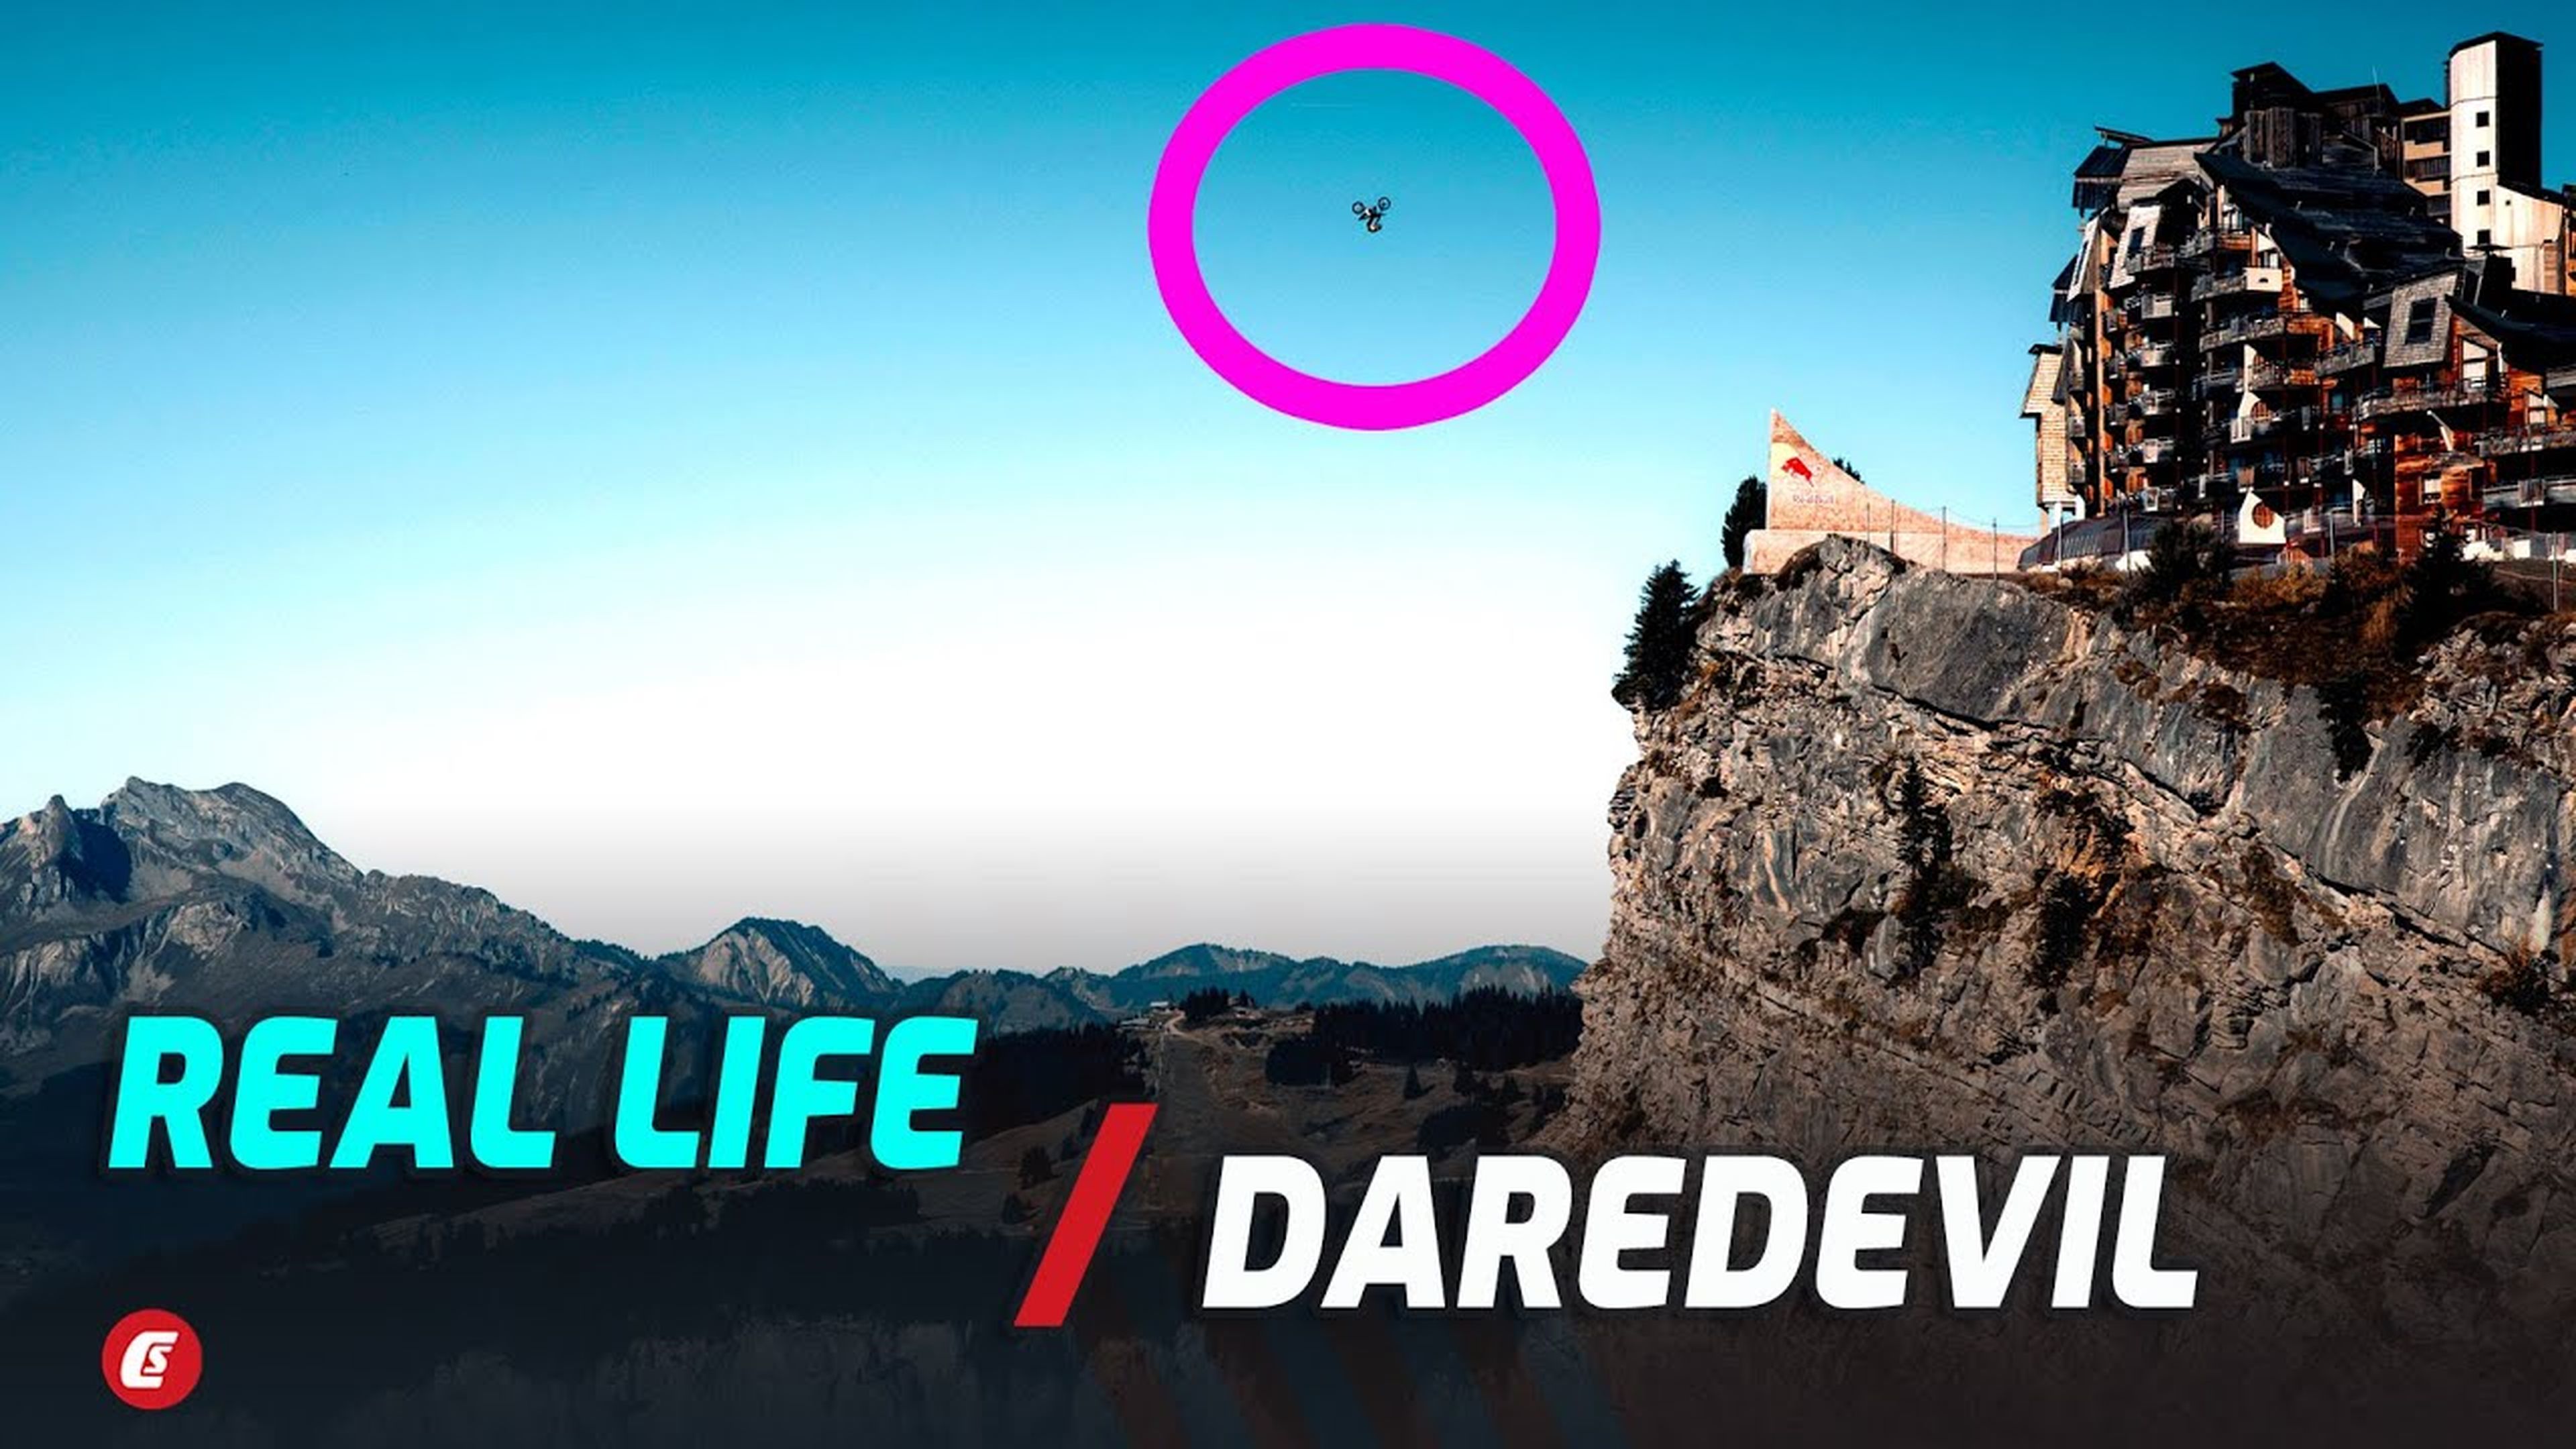 Daredevil Jumps His Motorcycle Off A 443-Foot Cliff